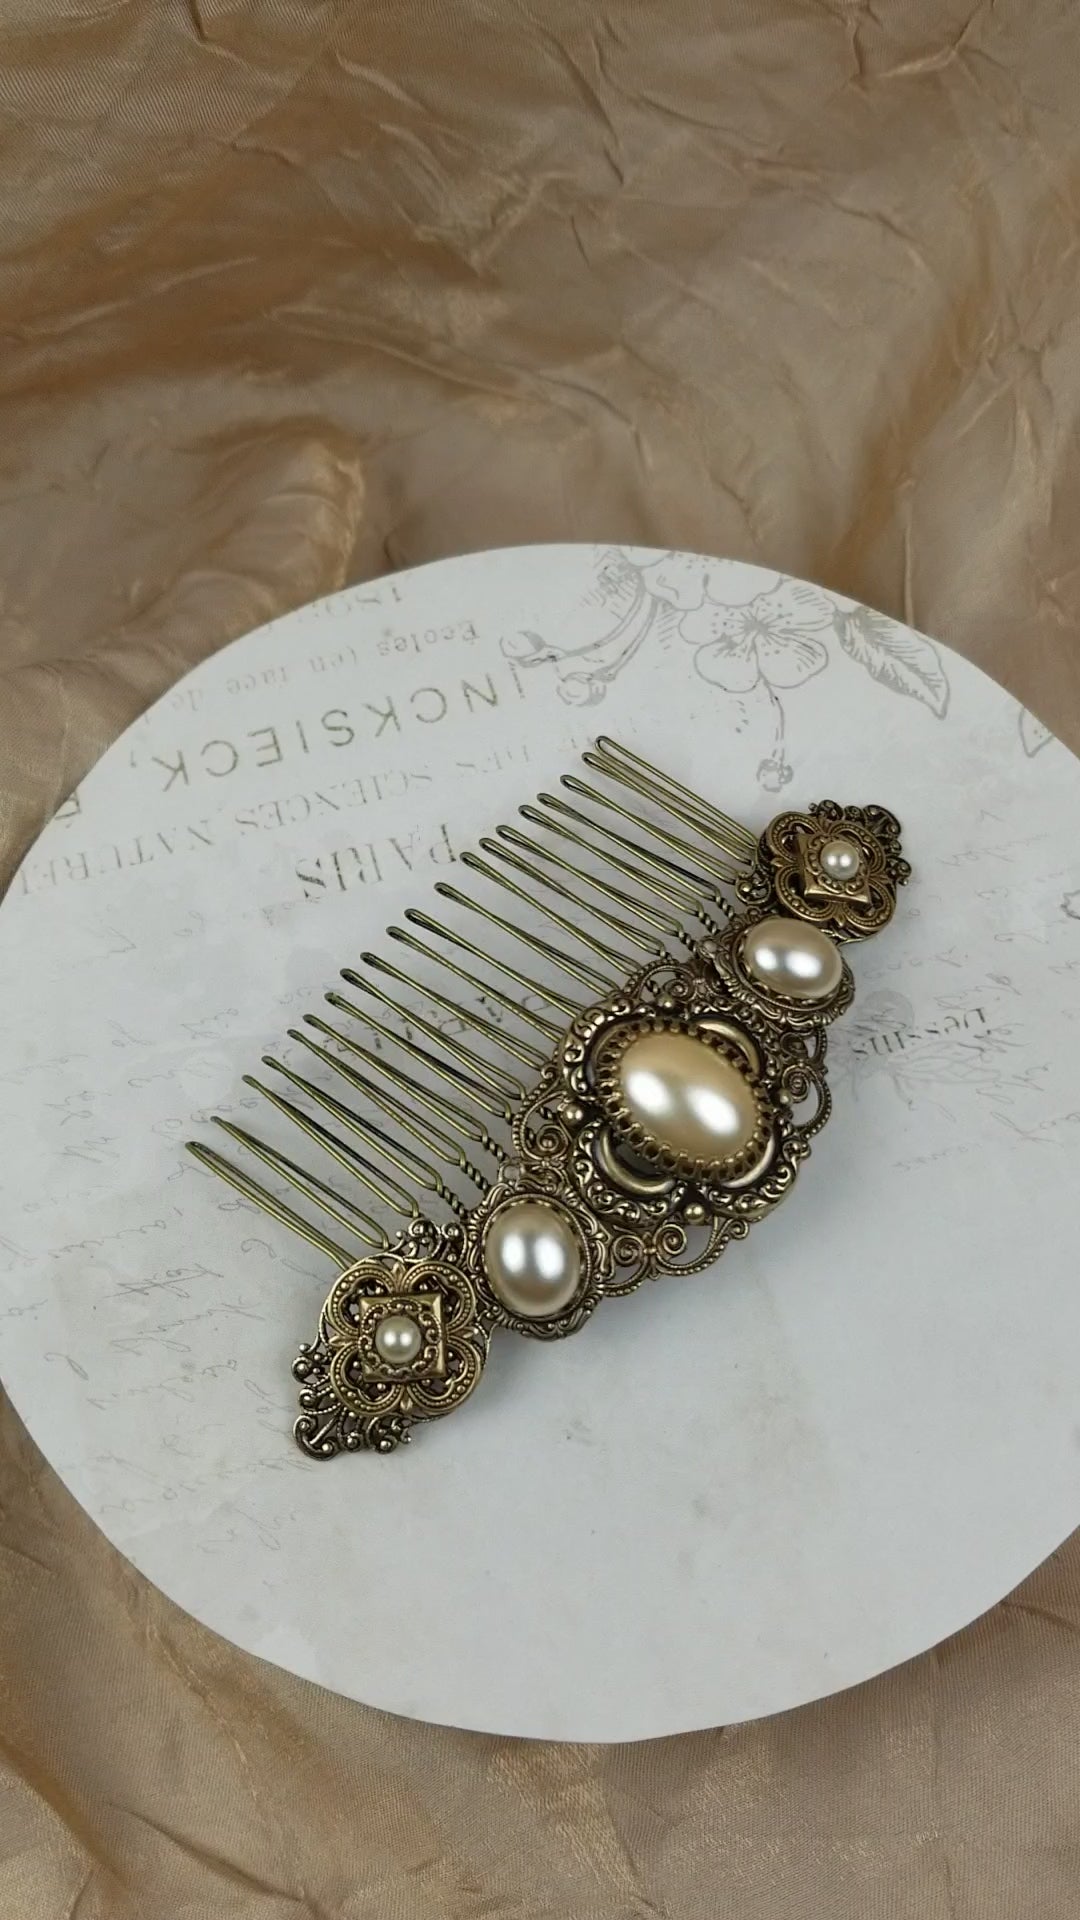 Video: Canterbury Comb in Cream Pearl and Antiqued Brass by Rabbitwood and Reason